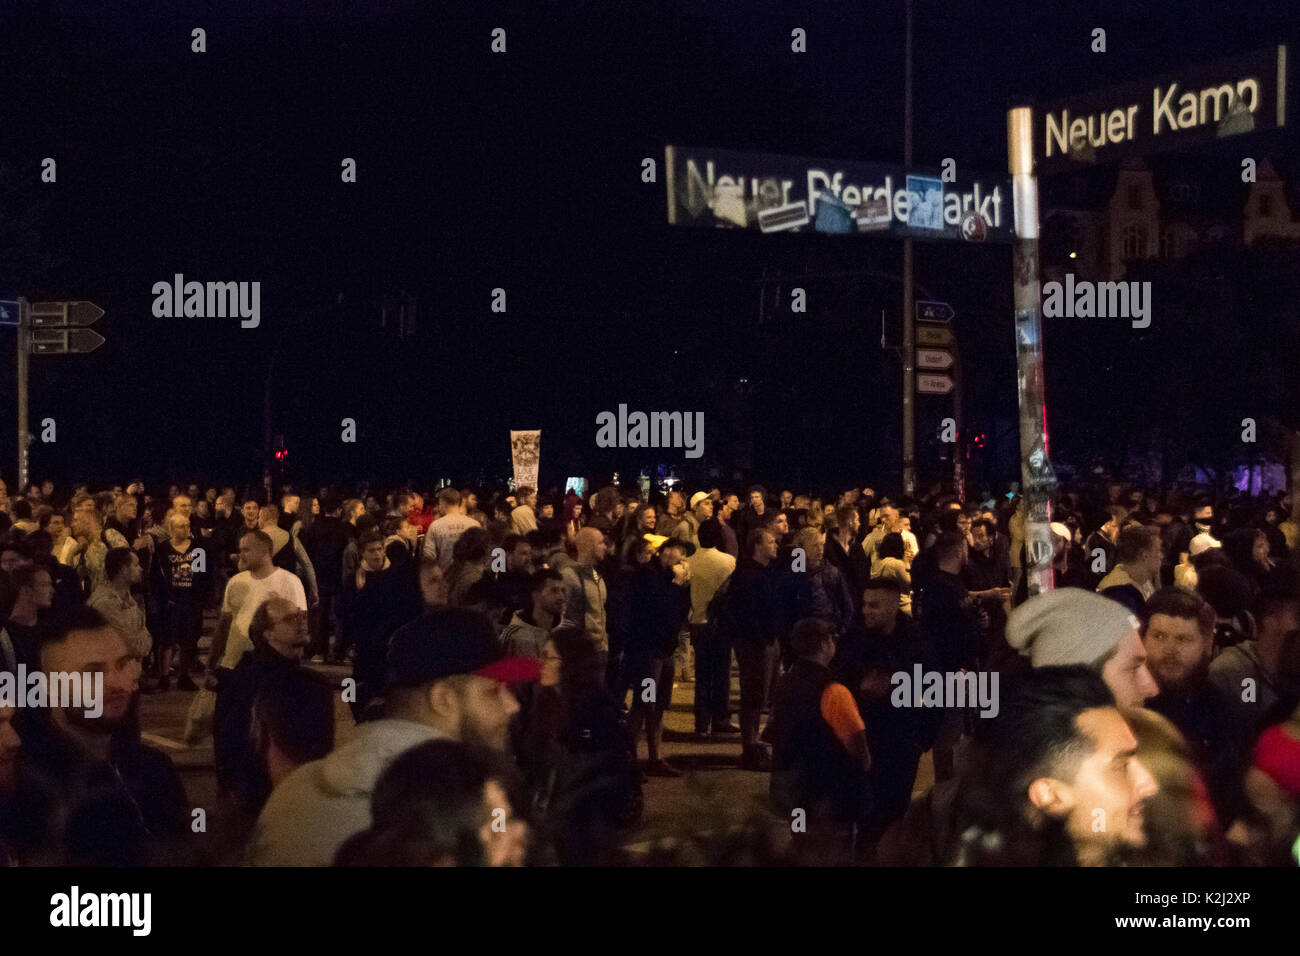 St. Pauli/Hamburg - Germany July 8, 2017: After the last protest ended, people & police gathered near Sternchanze waiting  for new roits. Stock Photo